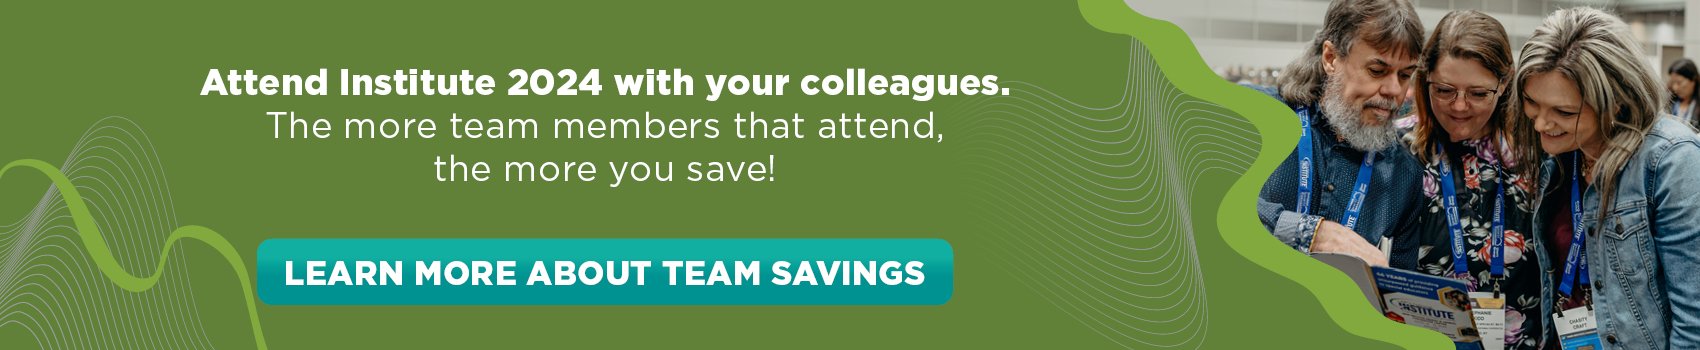 Attend Institute 2024 with your colleagues. 
LEARN MORE ABOUT TEAM SAVINGS  